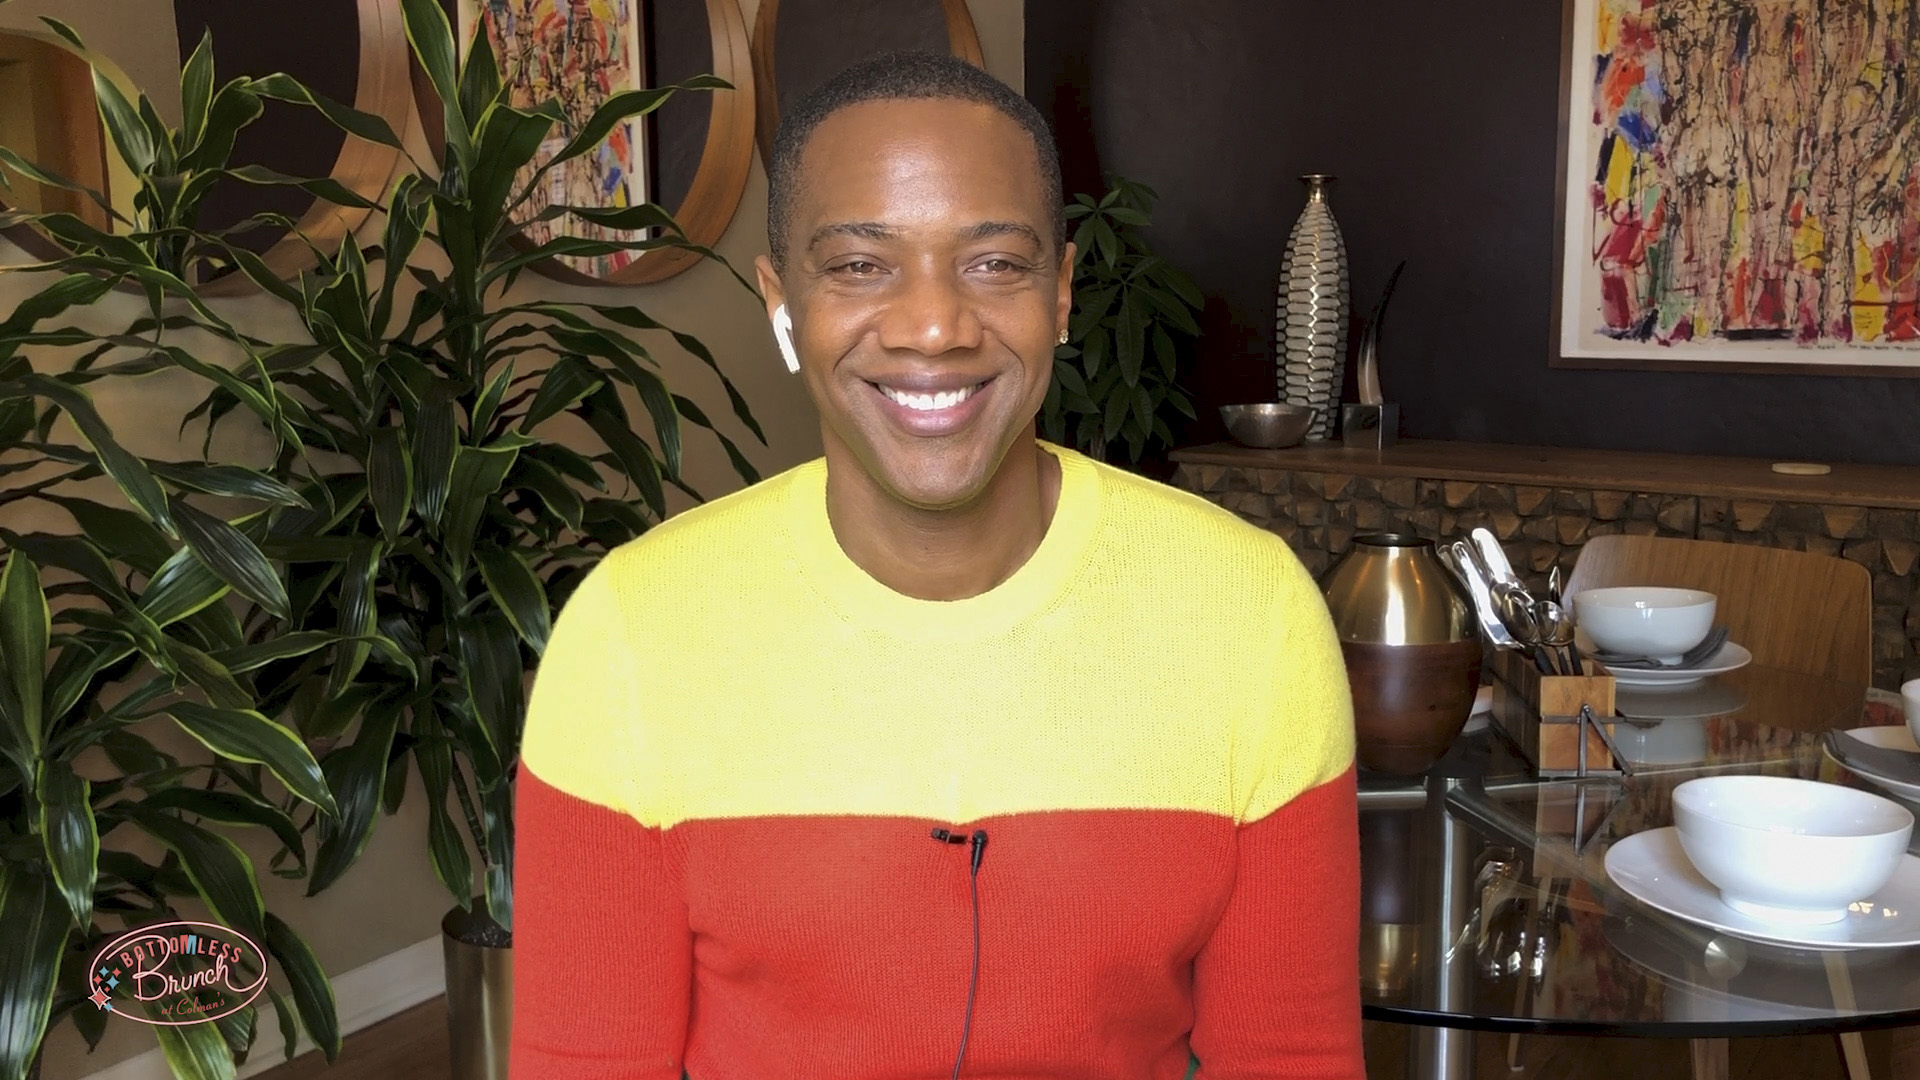 Pride Month with Lea DeLaria, J. August Richards, and Kate Moennig, Colman's guests enjoy cocktails and a virtual brunch., TV-14, Season 1010146, Episode 4